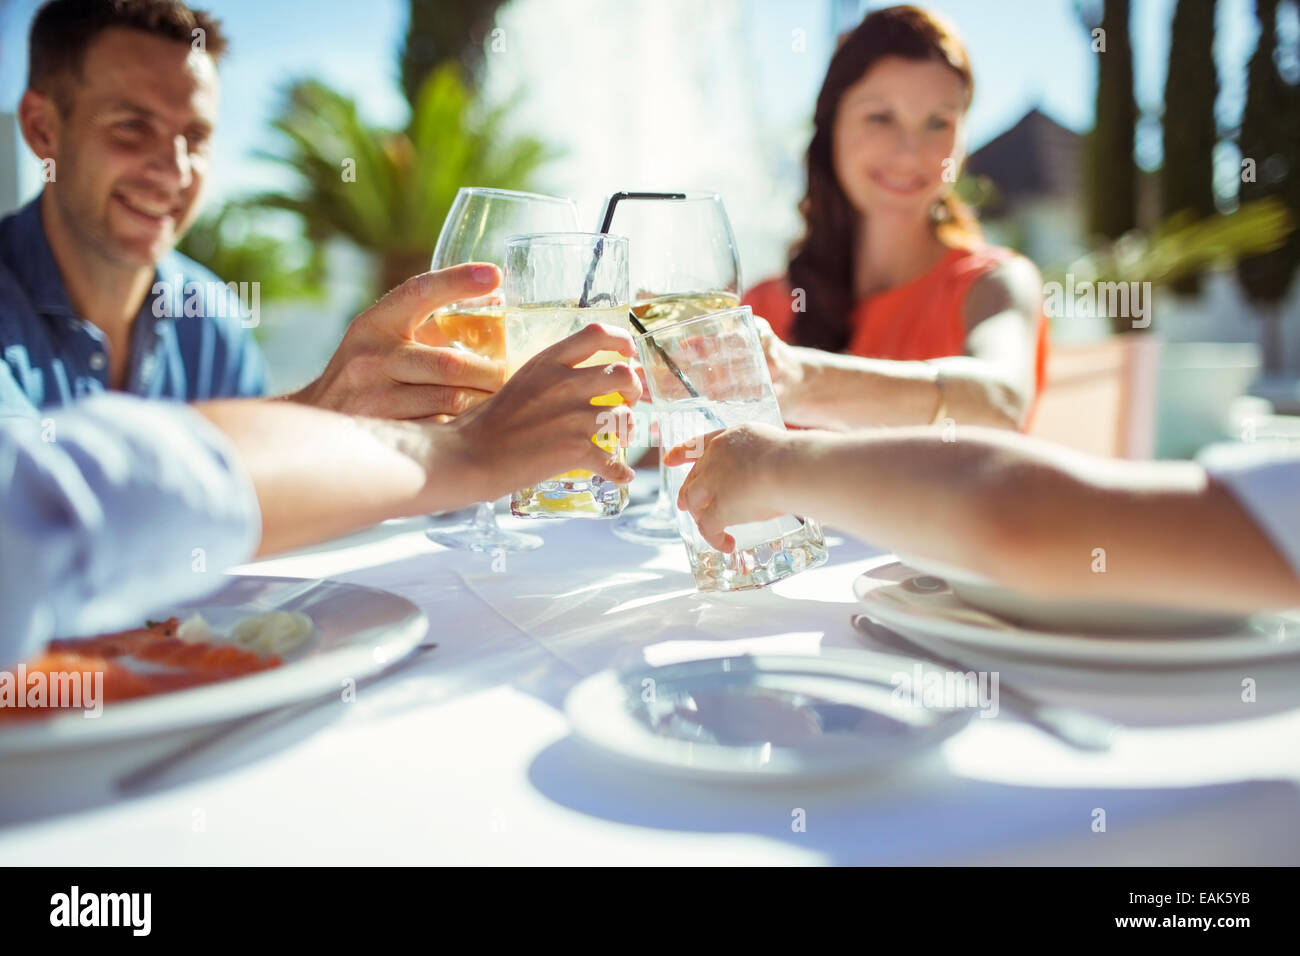 Friends raising toast at table outdoors Stock Photo